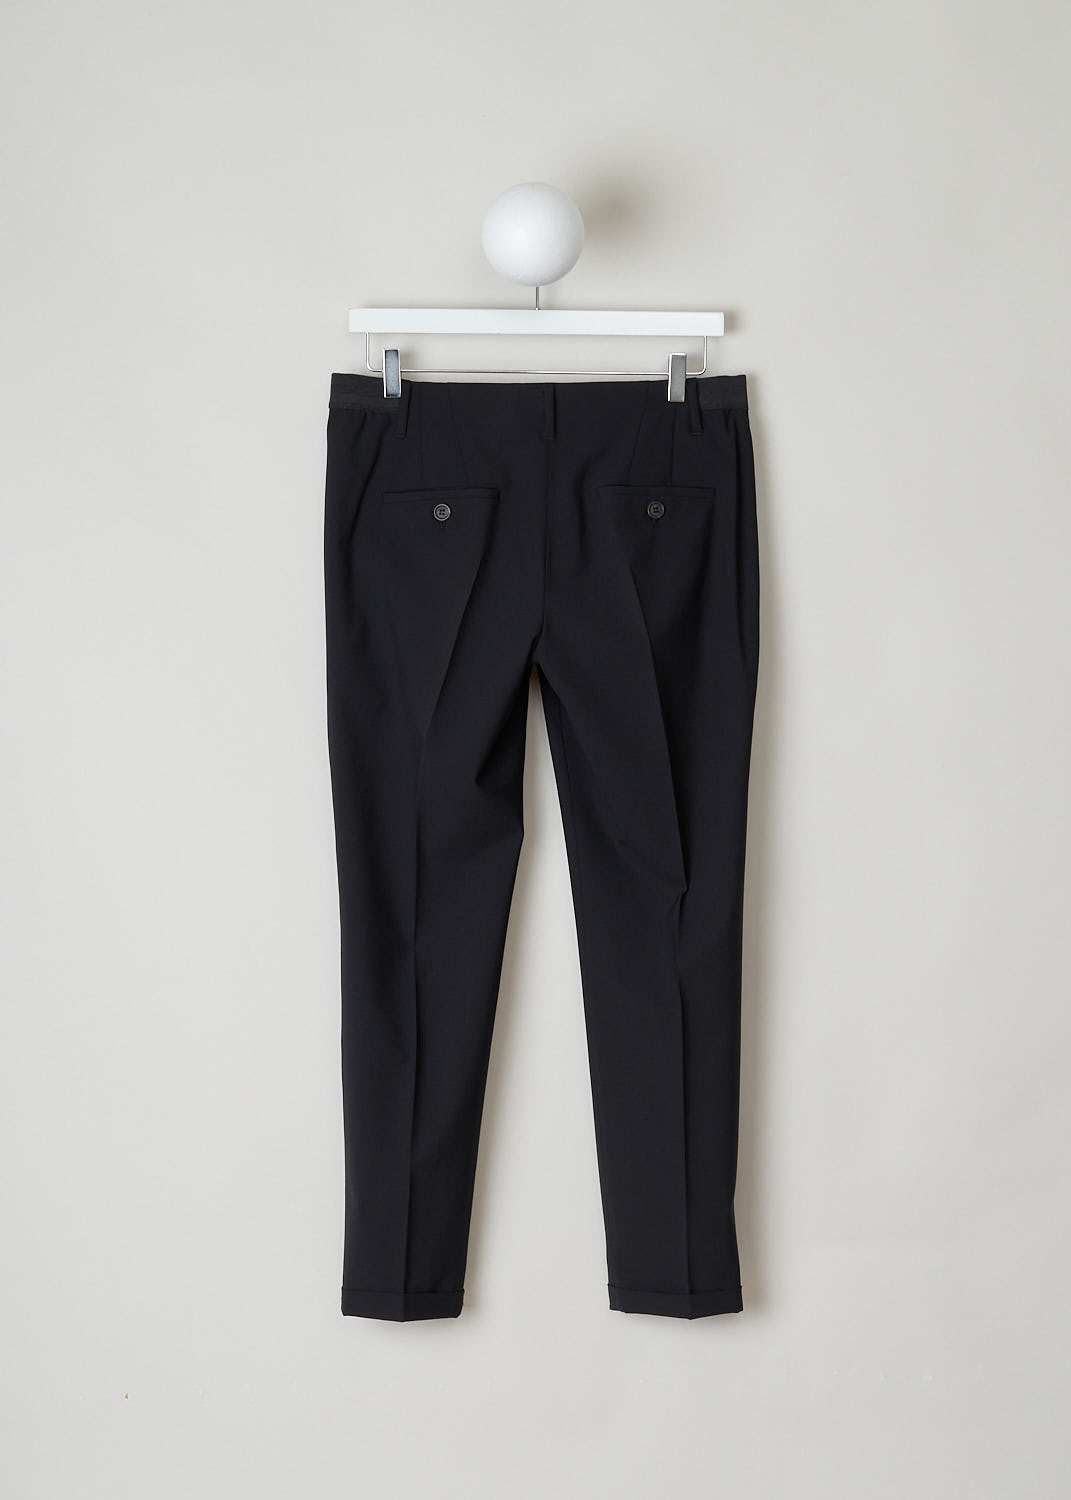 BRUNELLO CUCINELLI, BLACK PANTS WITH PARTLY ELASTICATED WAISTBAND, M0W07P1500_CD531, Black, Back, These black pants have a partly elasticated ribbed waistline with with a decorative horizontal stripe. These pants have two belt loops on the backside. A concealed clasp and zipper function as the closing option. The pants have forward slanted pockets in the front and two buttoned welt pockets in the back.The tapered pant legs have centre creases. These pants have a folded hem.
